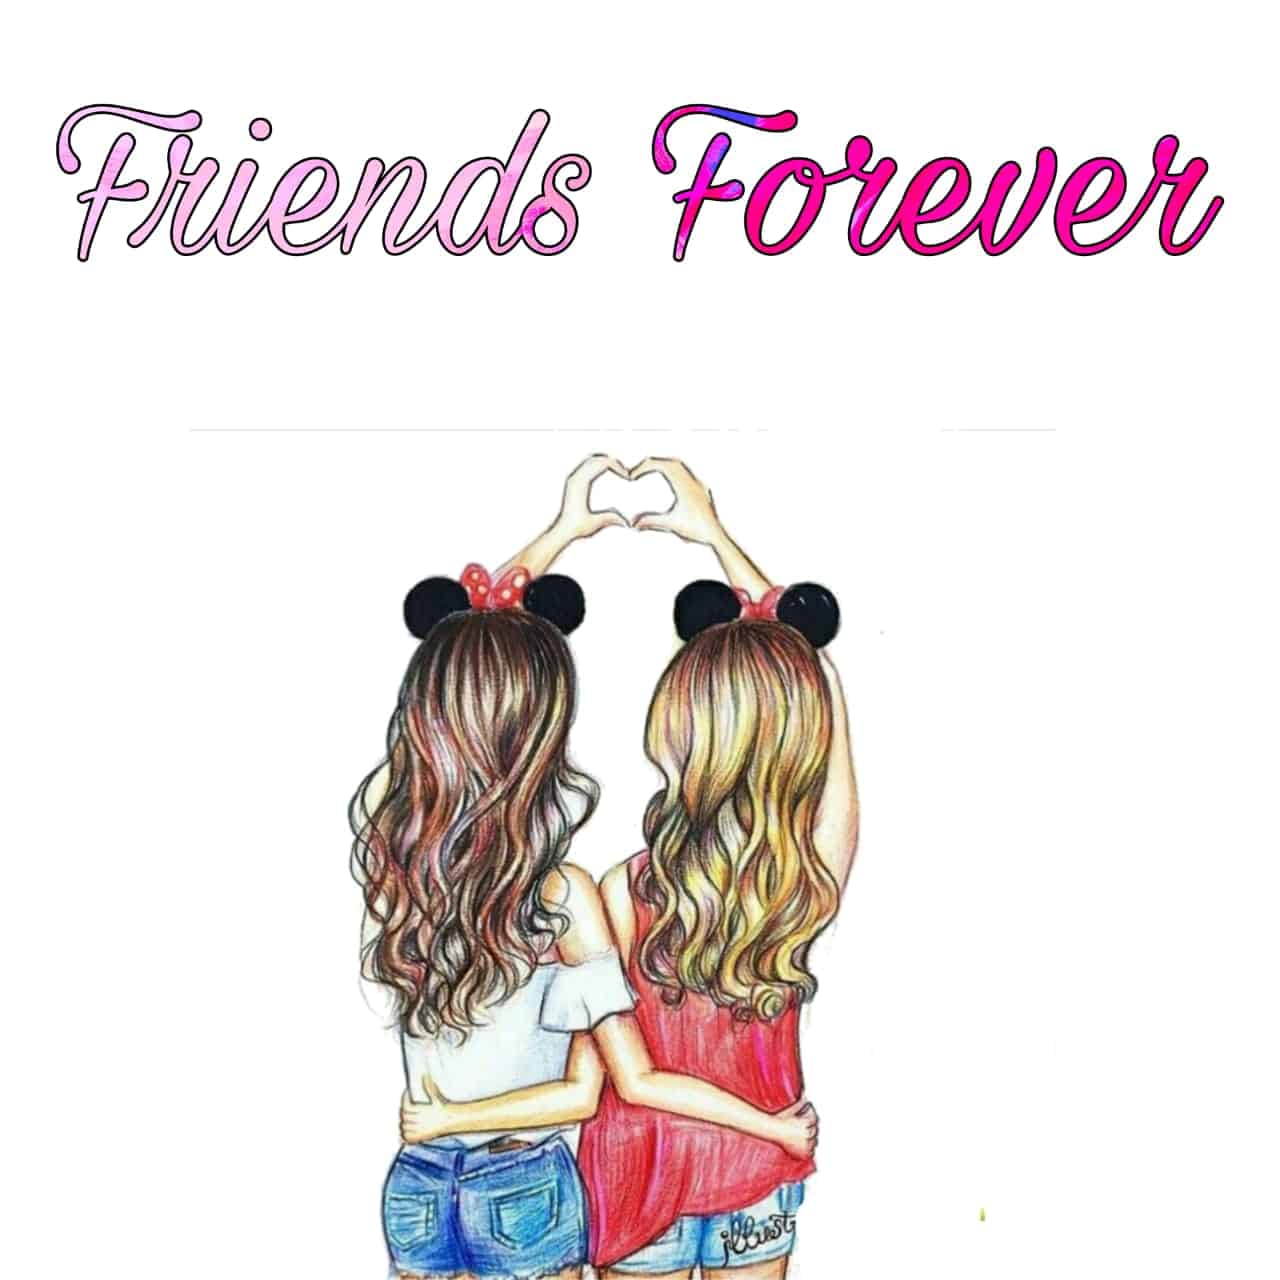 Friends Forever DP